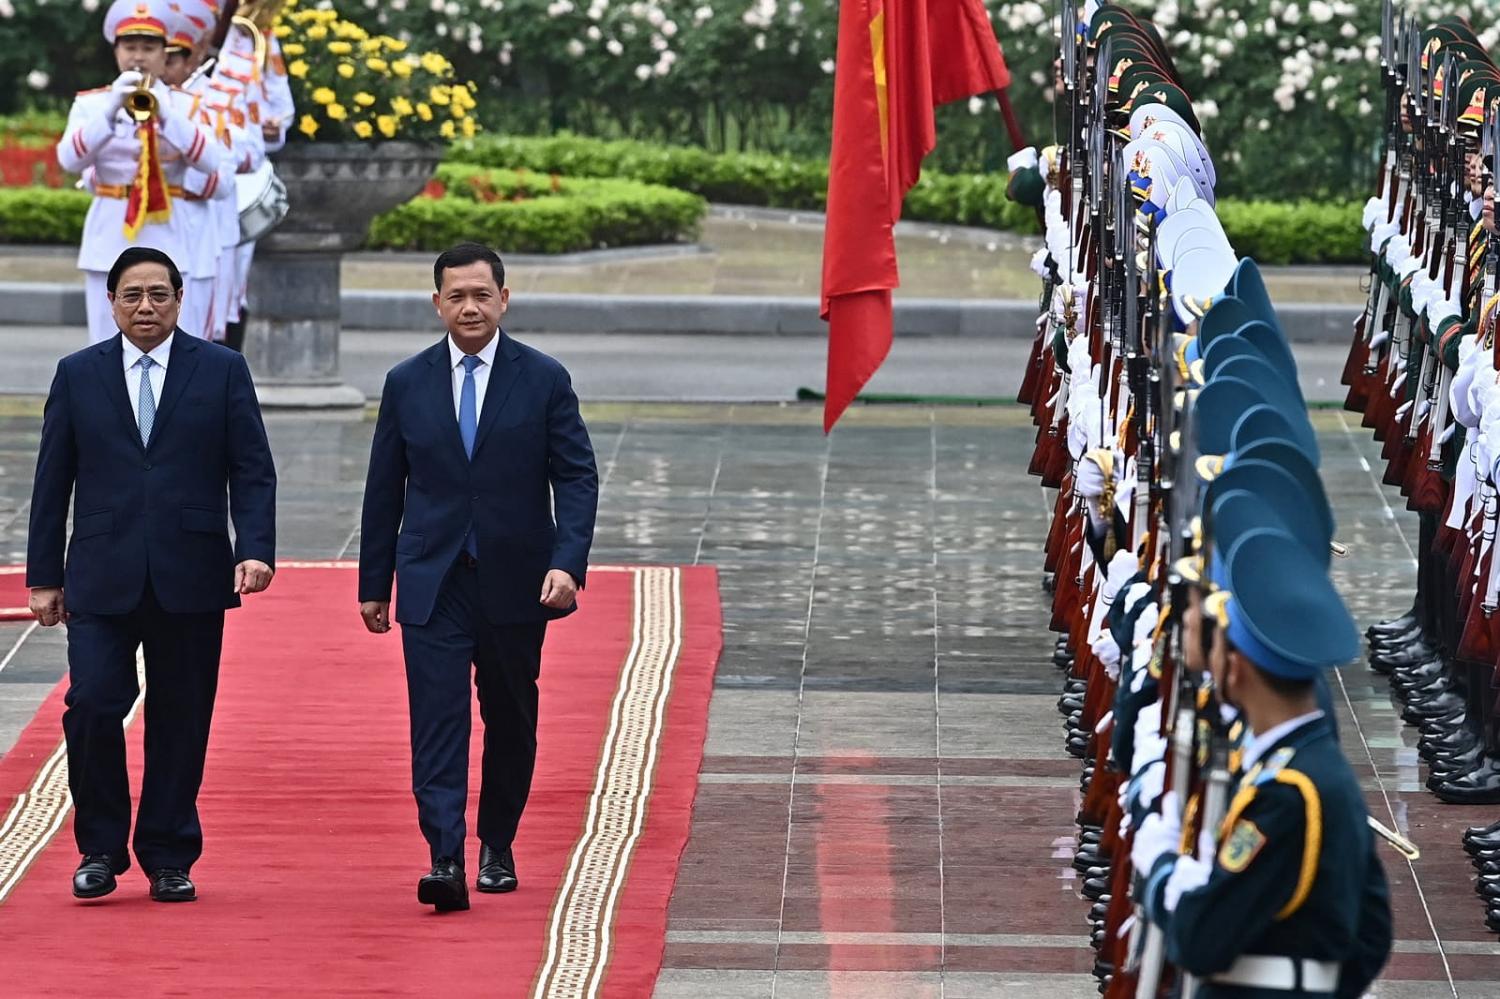 Vietnam’s Prime Minister Pham Minh Chinh, left, with his counterpart from Cambodia Prime Minister Hun Manet at the Presidential Palace in Hanoi, 11 December 2023 (Nhac Nguyen/AFP via Getty Images)